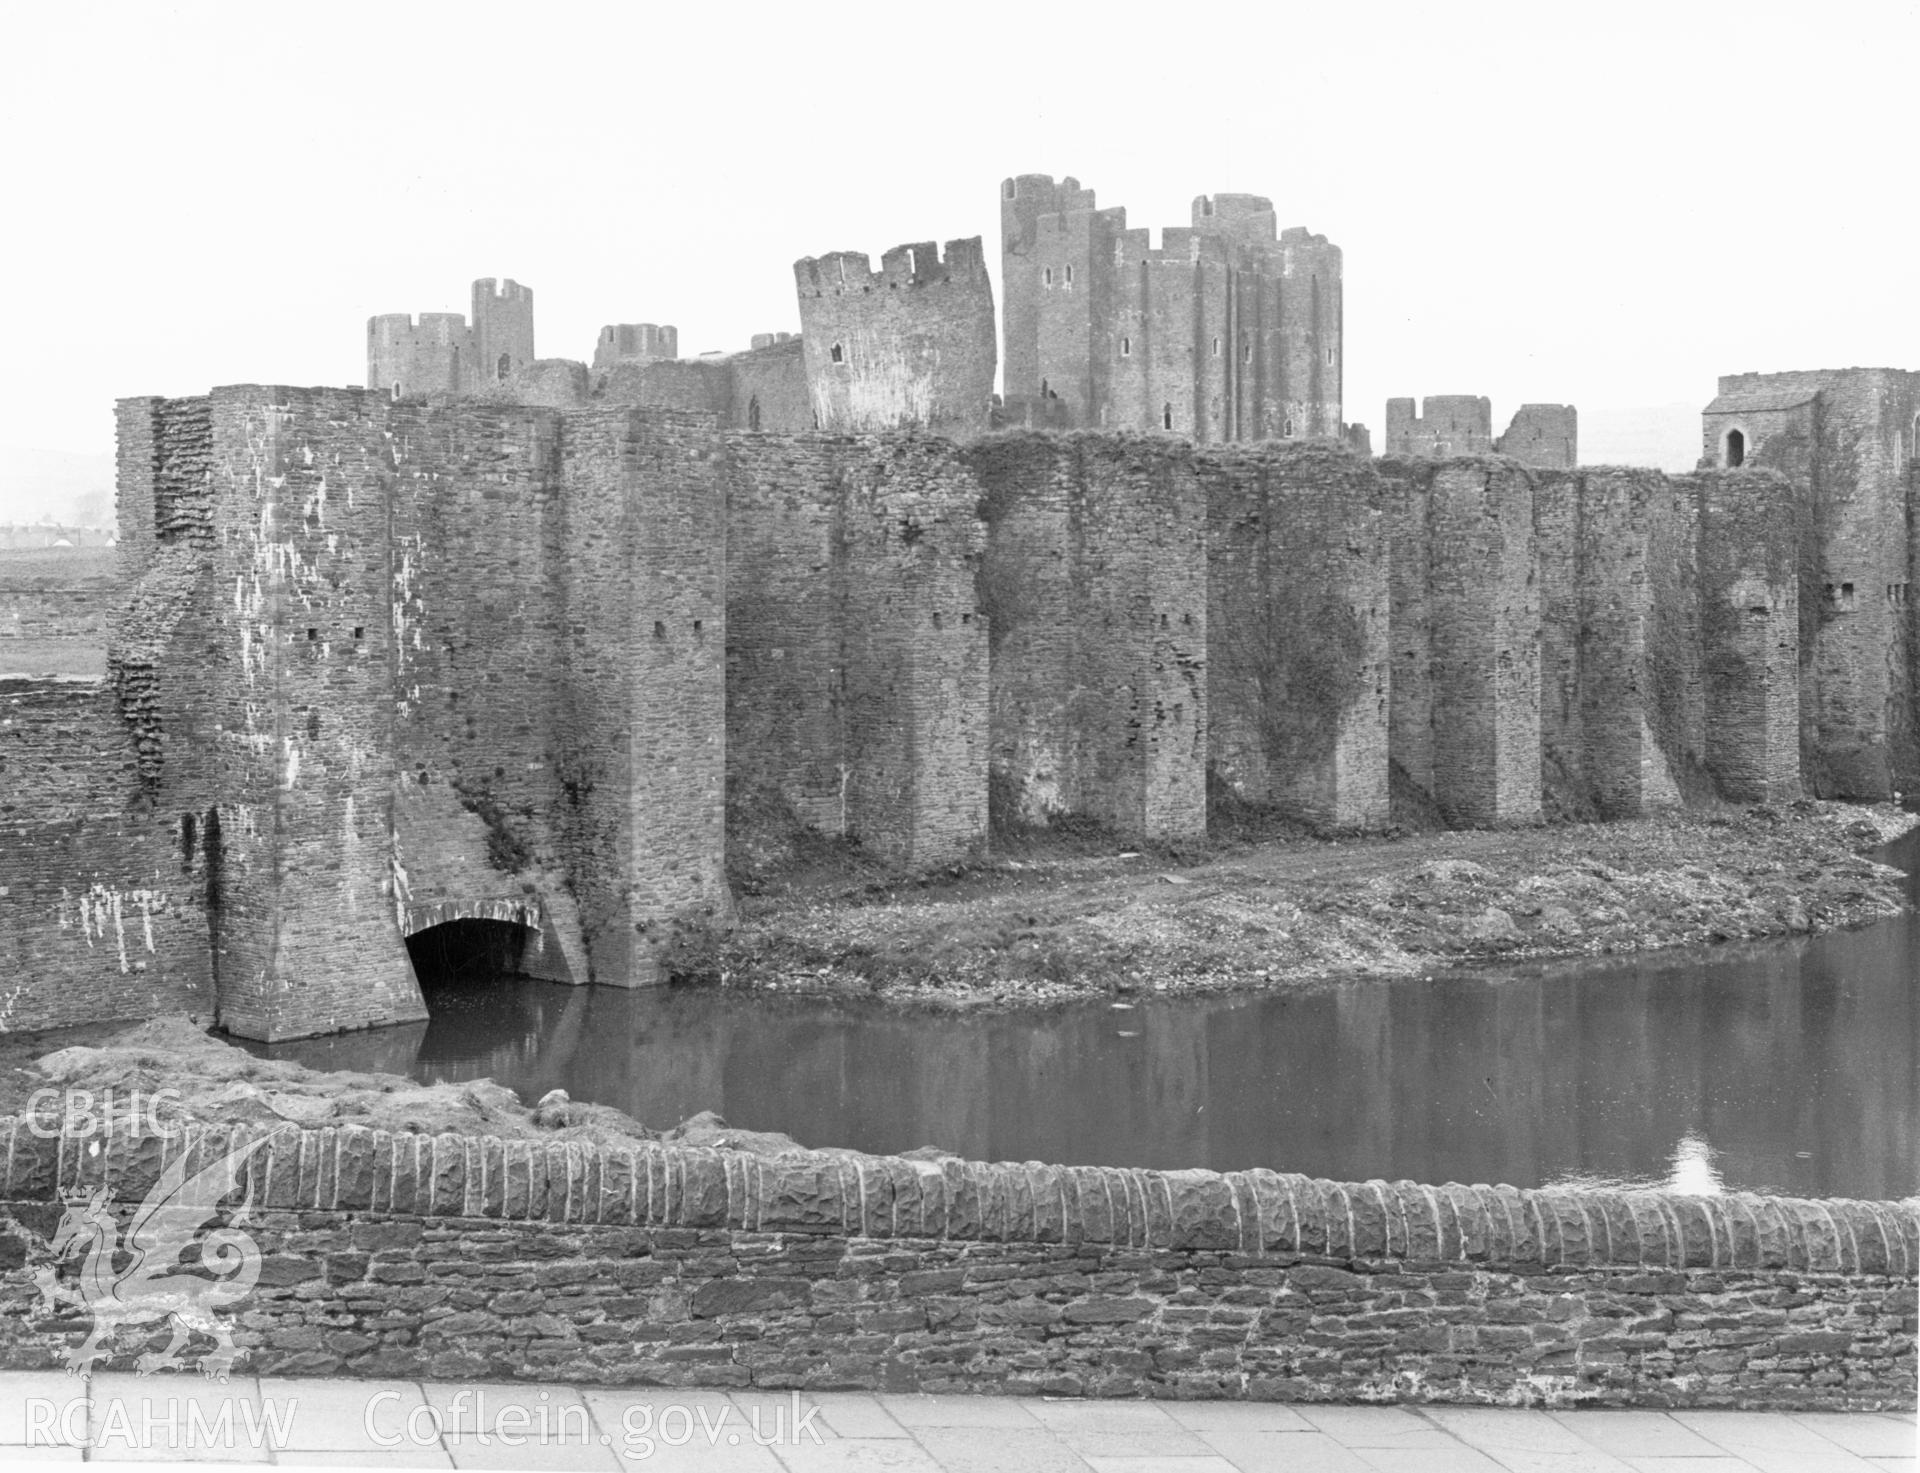 1 b/w print showing view of Caerphilly castle, collated by the former Central Office of Information.